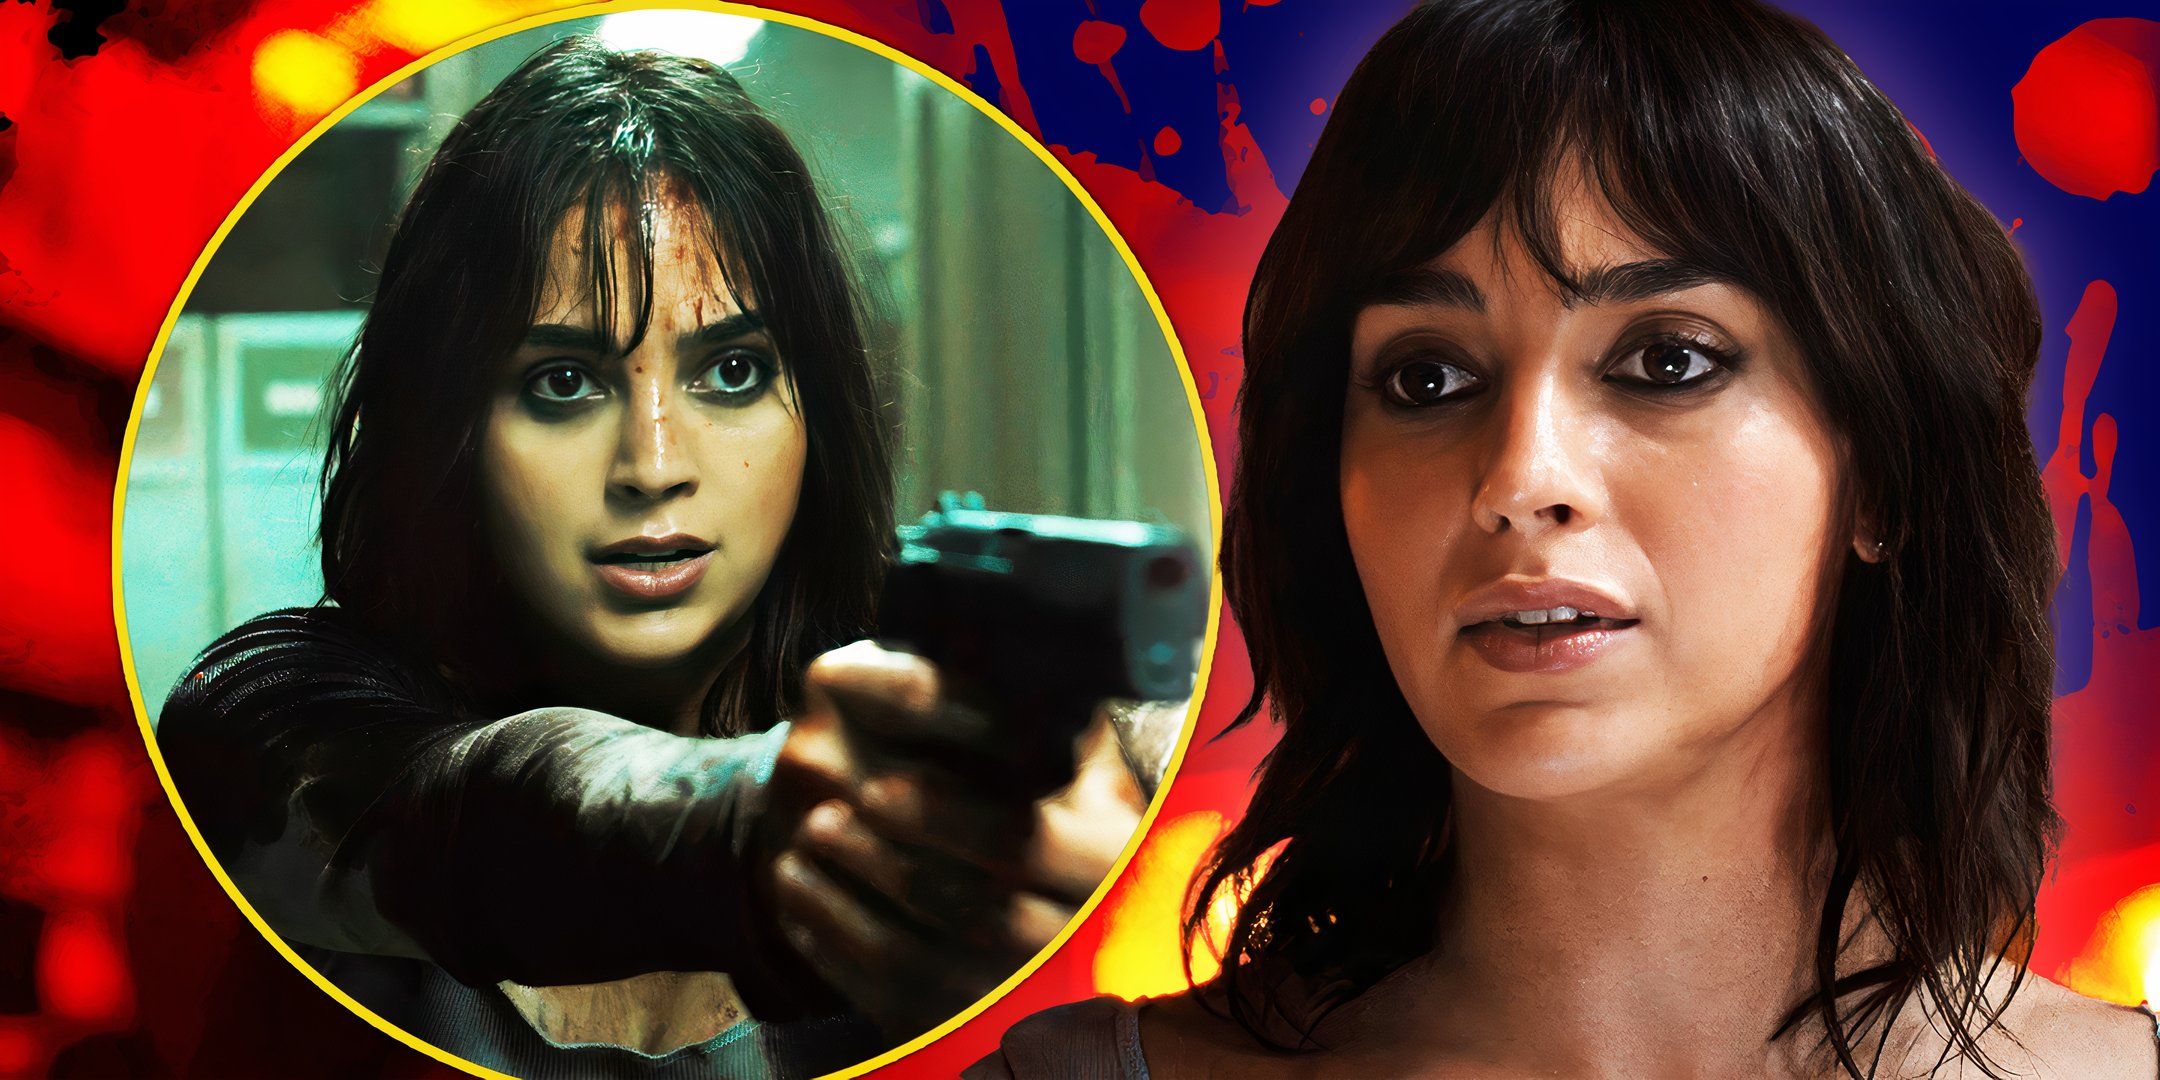 Melissa Barrera as Joey aiming a gun and looking bloody in Abigail Exclusive header